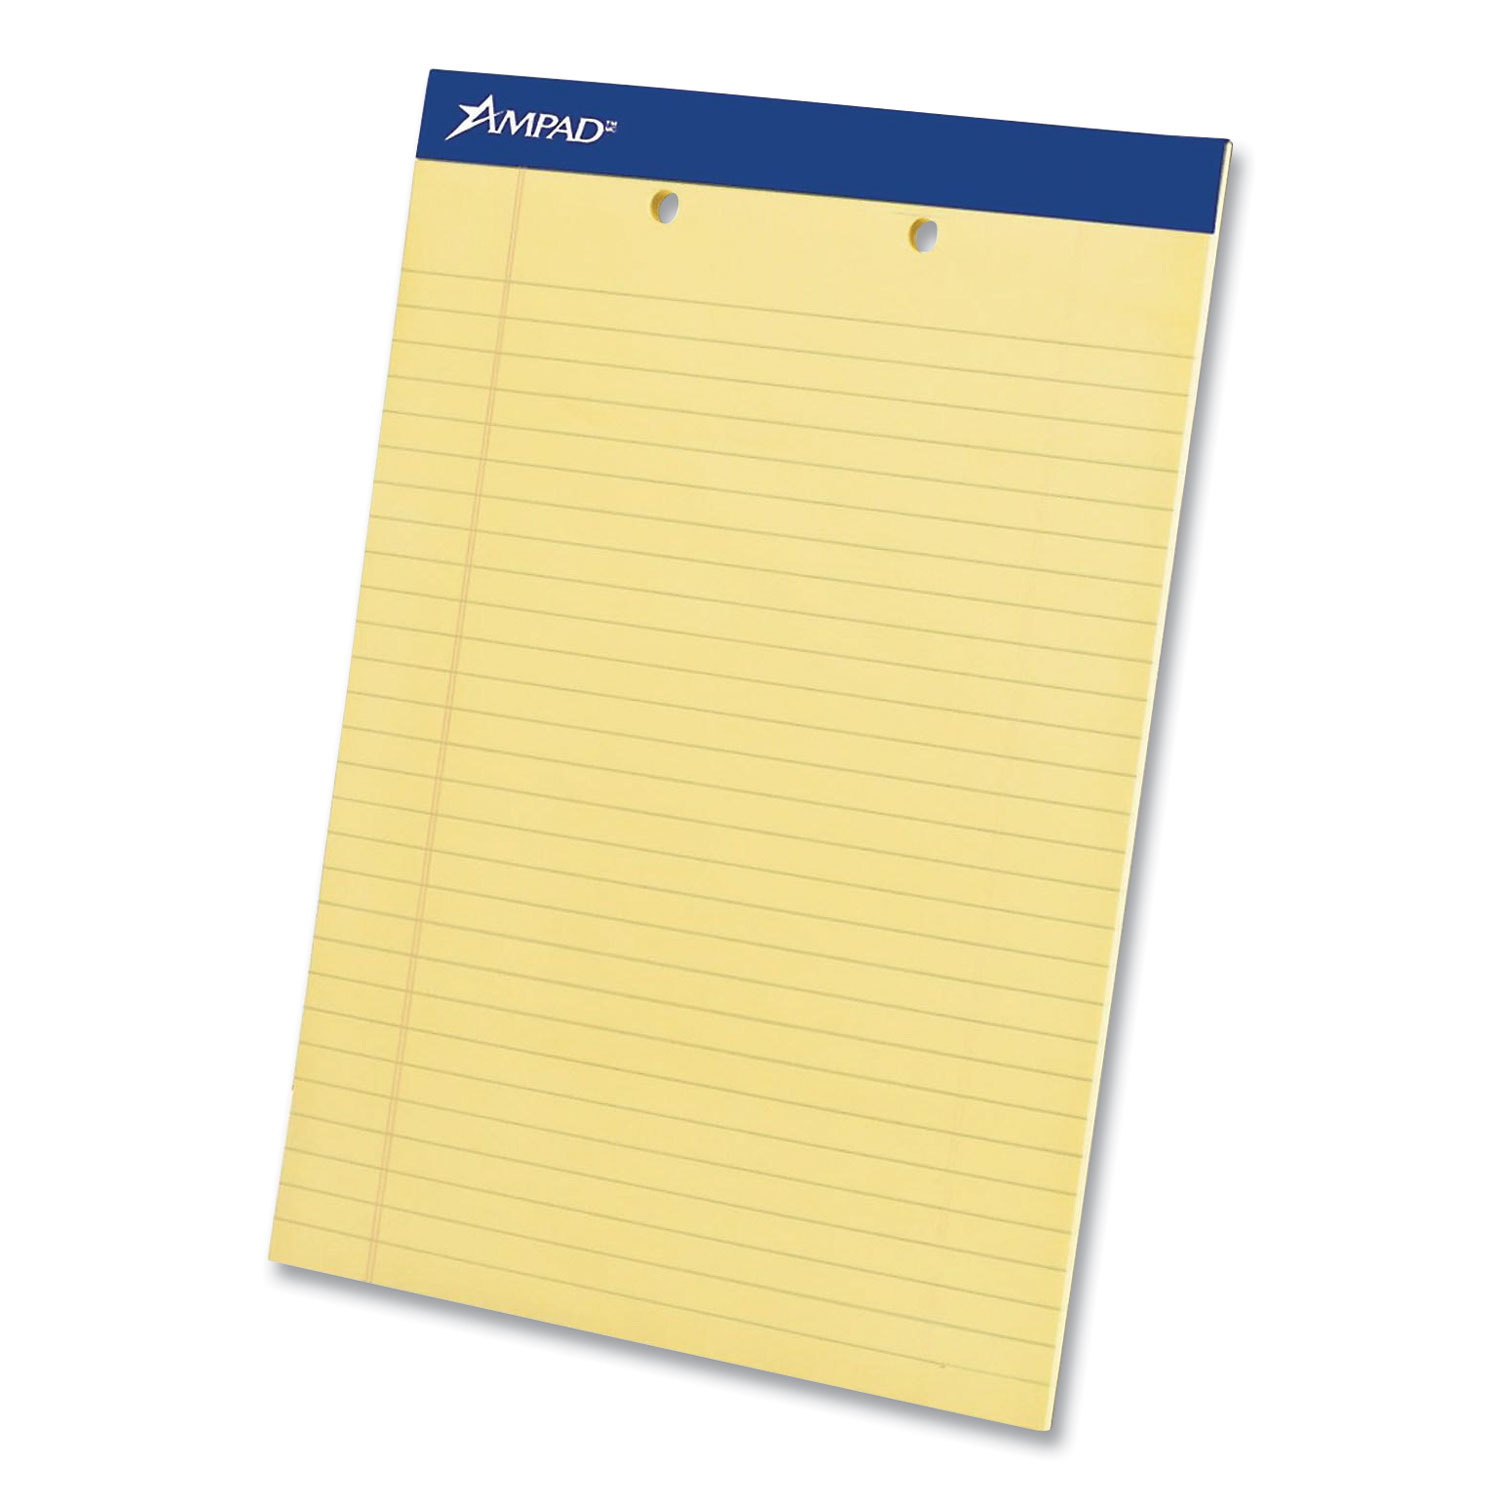 Ampad® Perforated Writing Pads,Wide/Legal Rule, Canary Sheets, 2-Hole Top Punched, 8.5 x 11.75, 50 Sheets, Dozen